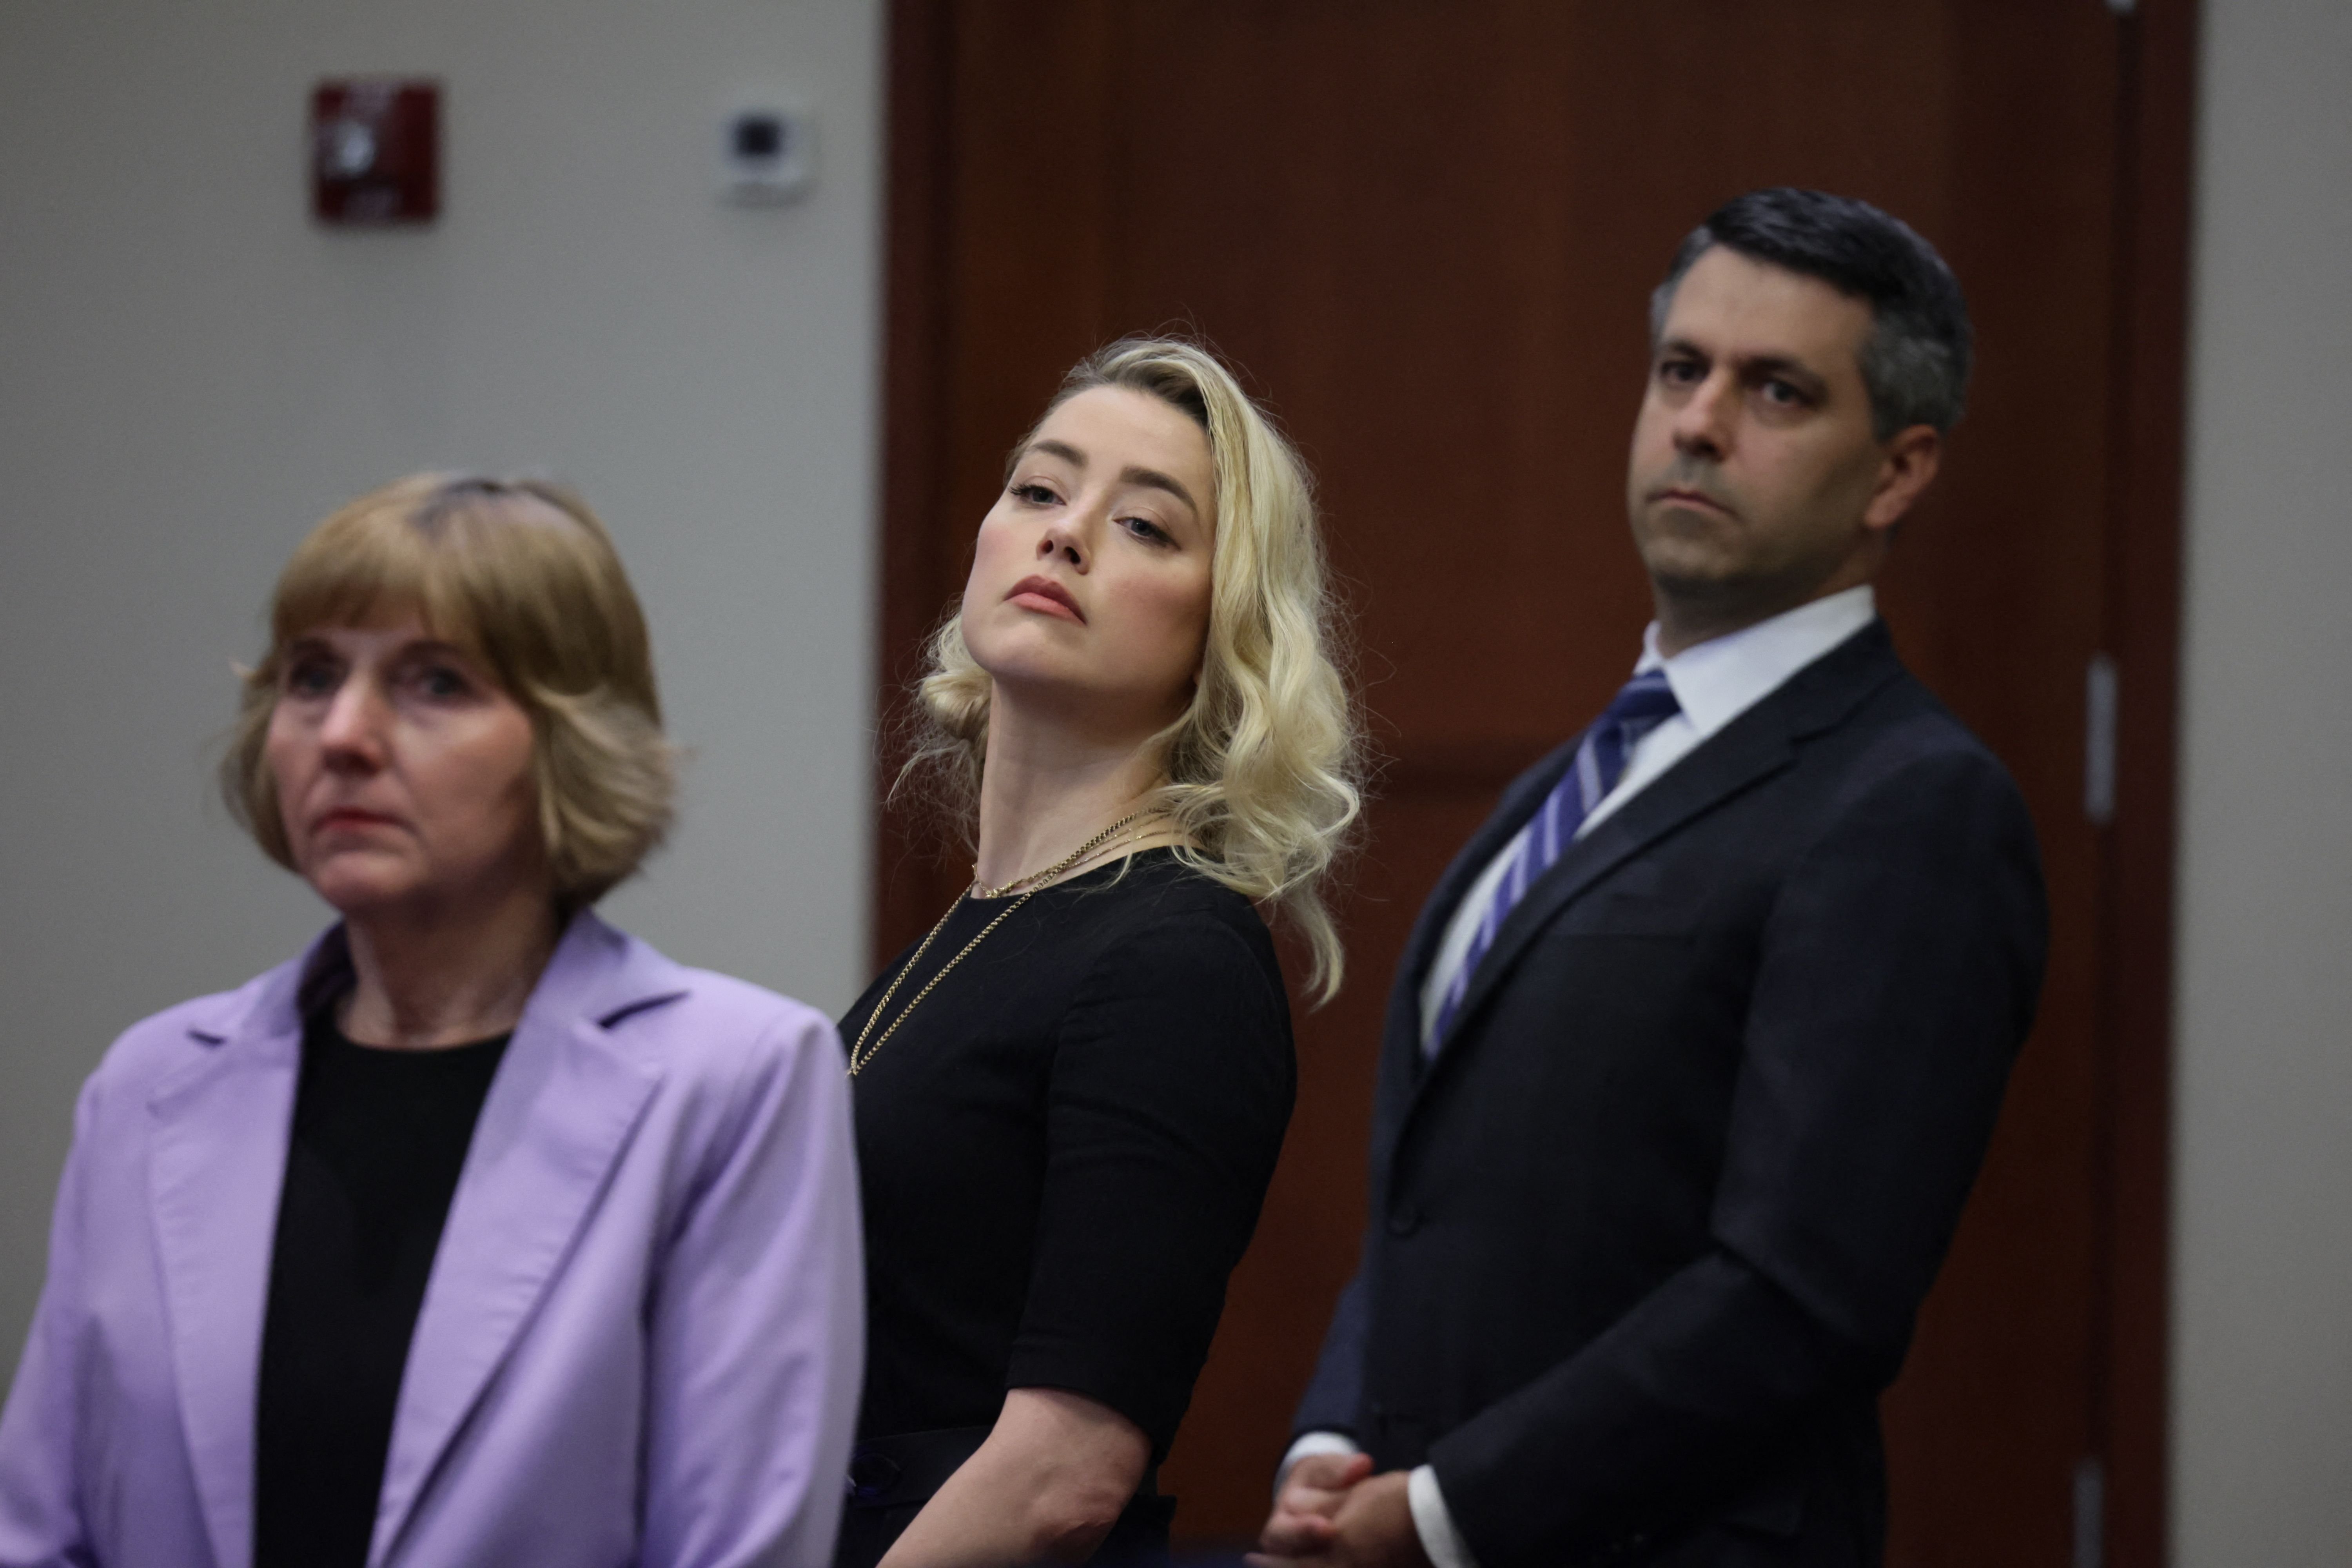 Amber Heard and her attorneys Elaine Bredehoft and Benjamin Rottenborn at the Fairfax County Circuit Courthouse on June 1, 2022 | Source: Getty Images